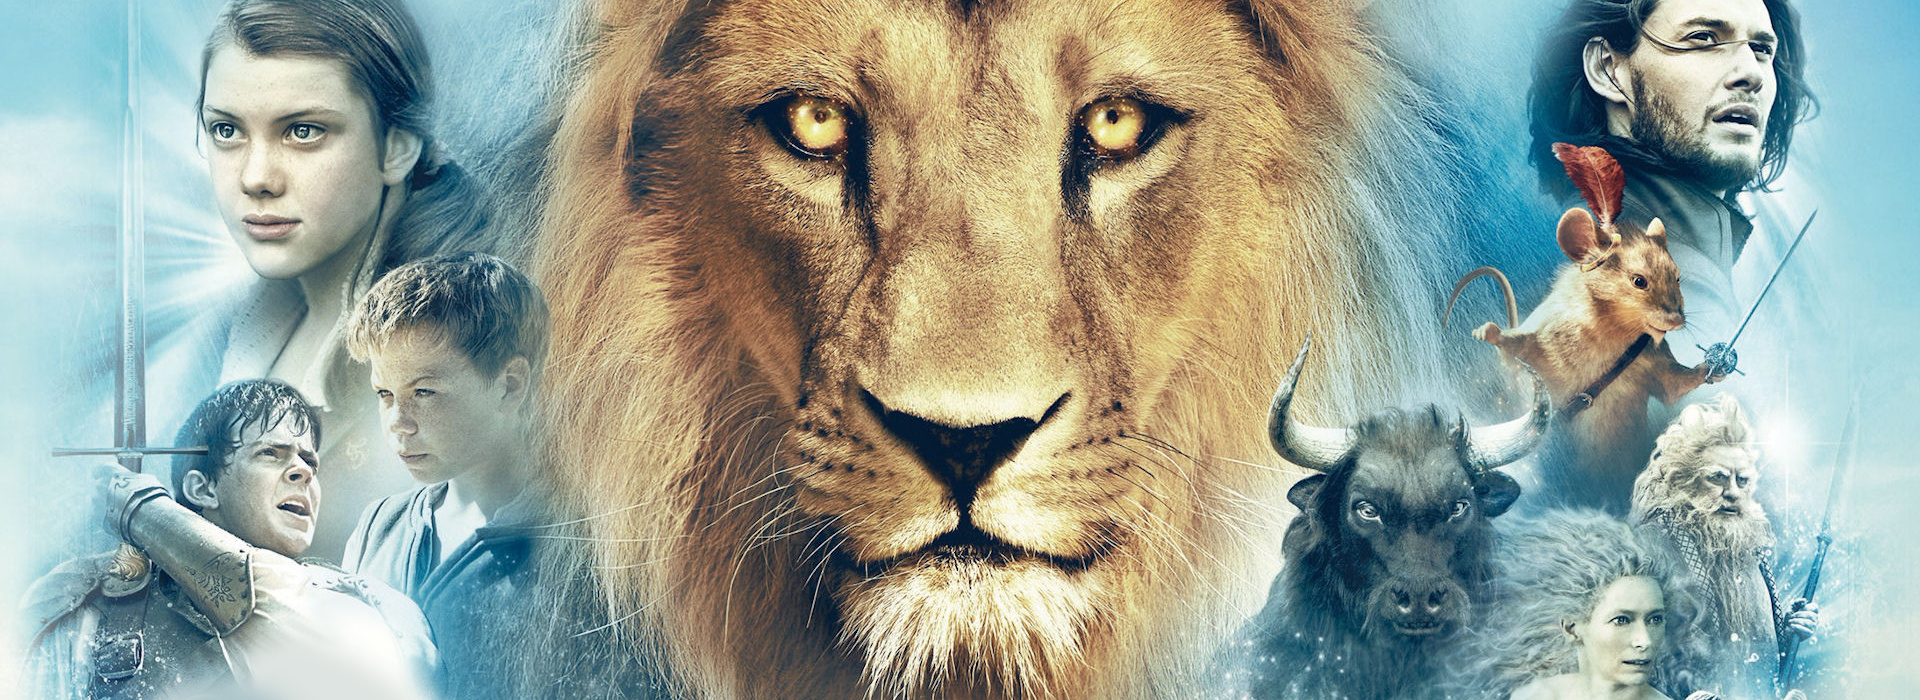 Movie poster The Chronicles of Narnia: The Voyage of the Dawn Treader